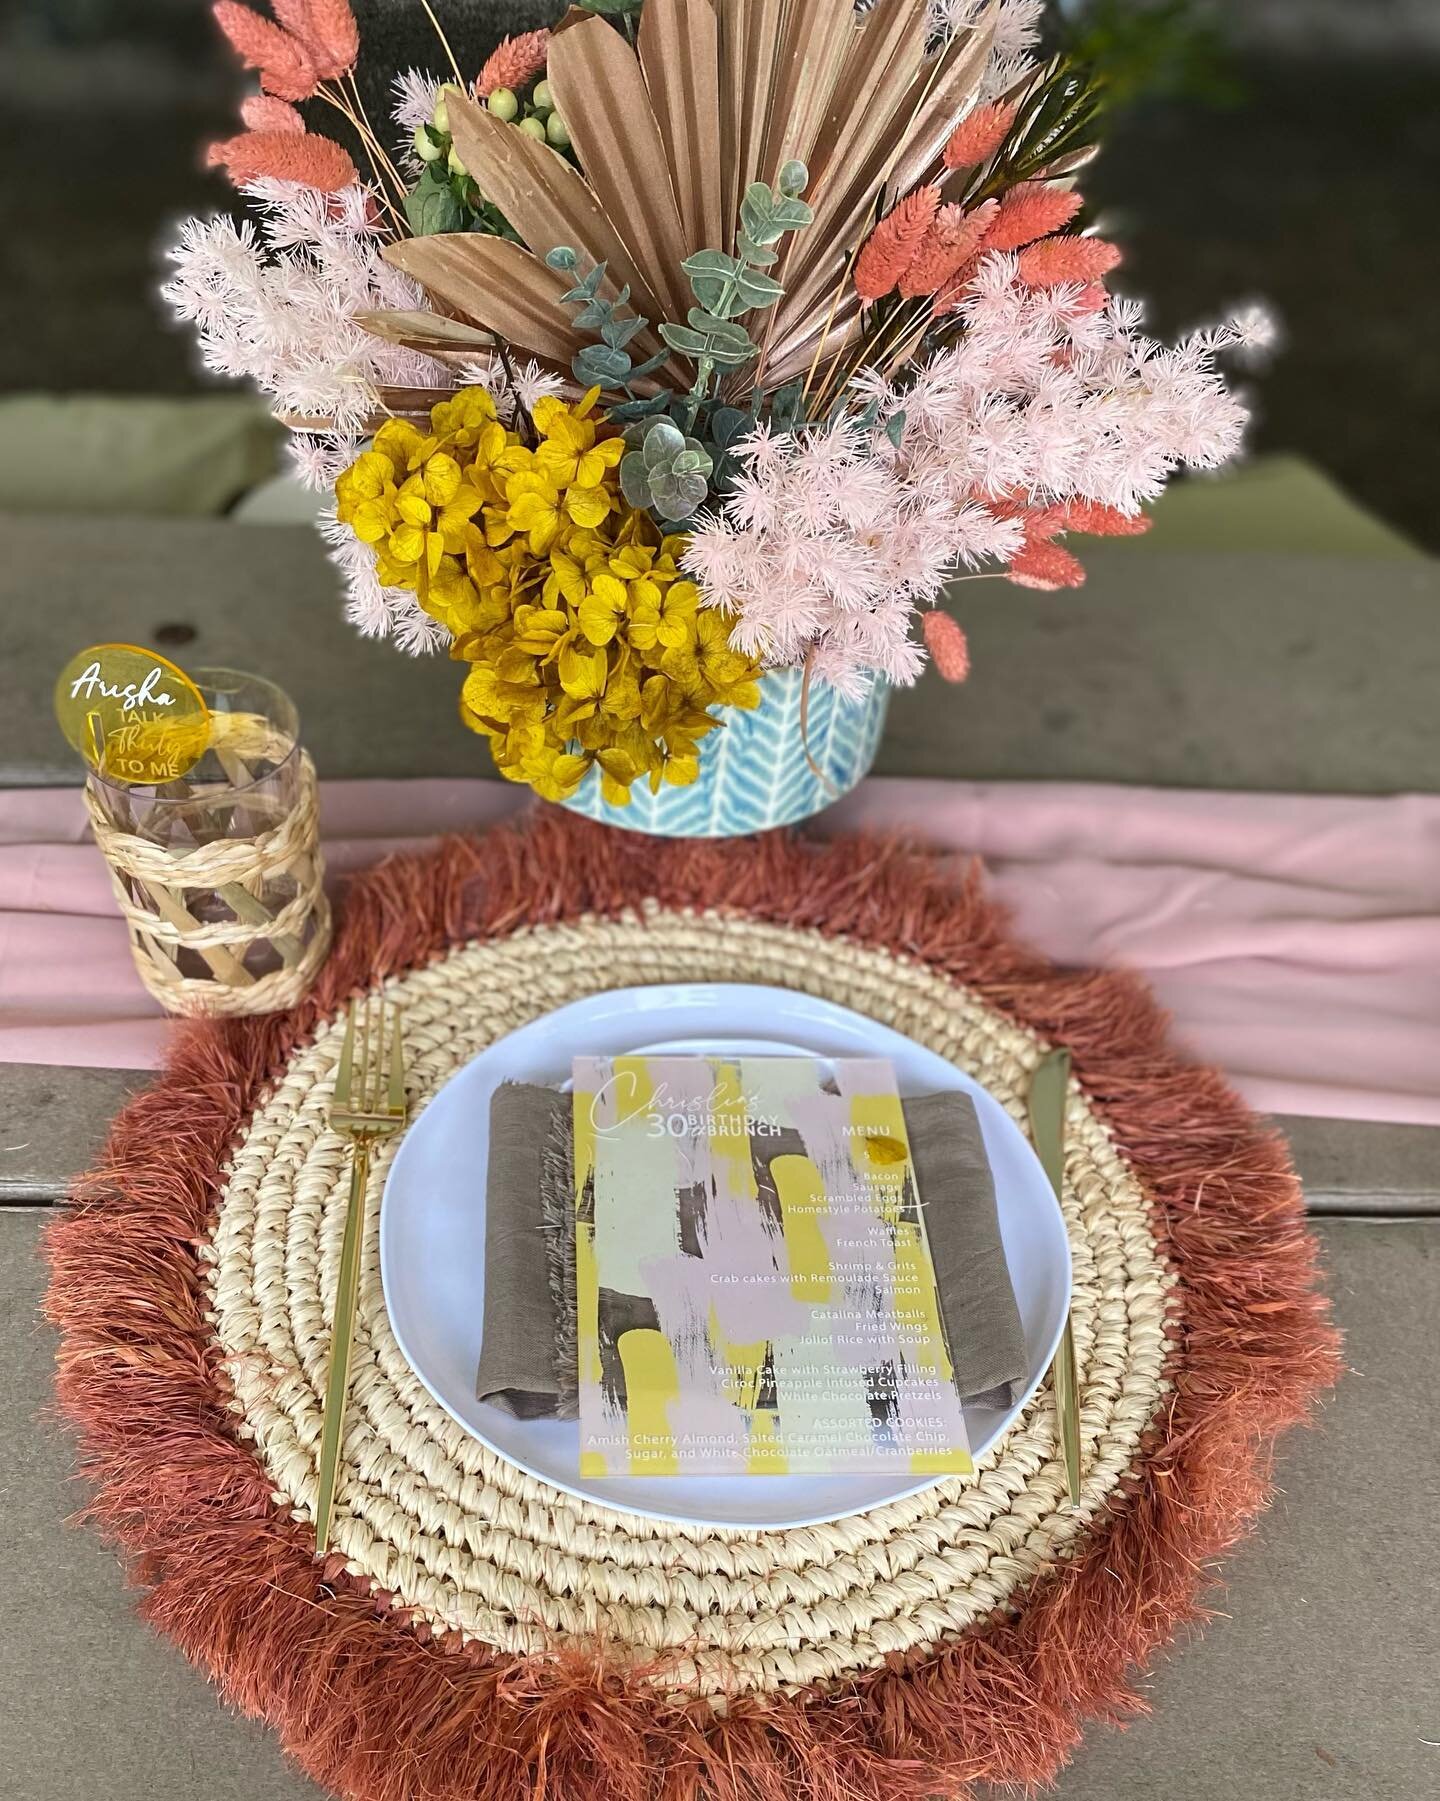 All the summery boho feels🌾

 #tablescape #dmvevents #dinnerparty #birthday #30thbirthday  #eventdesign #bohopicnic #bohoparty #gardenparty #eventdecor #eventstylist #instagood #instapic #sohappyimthirty #pampas #bohoevent 
#partyispiration #mddecor